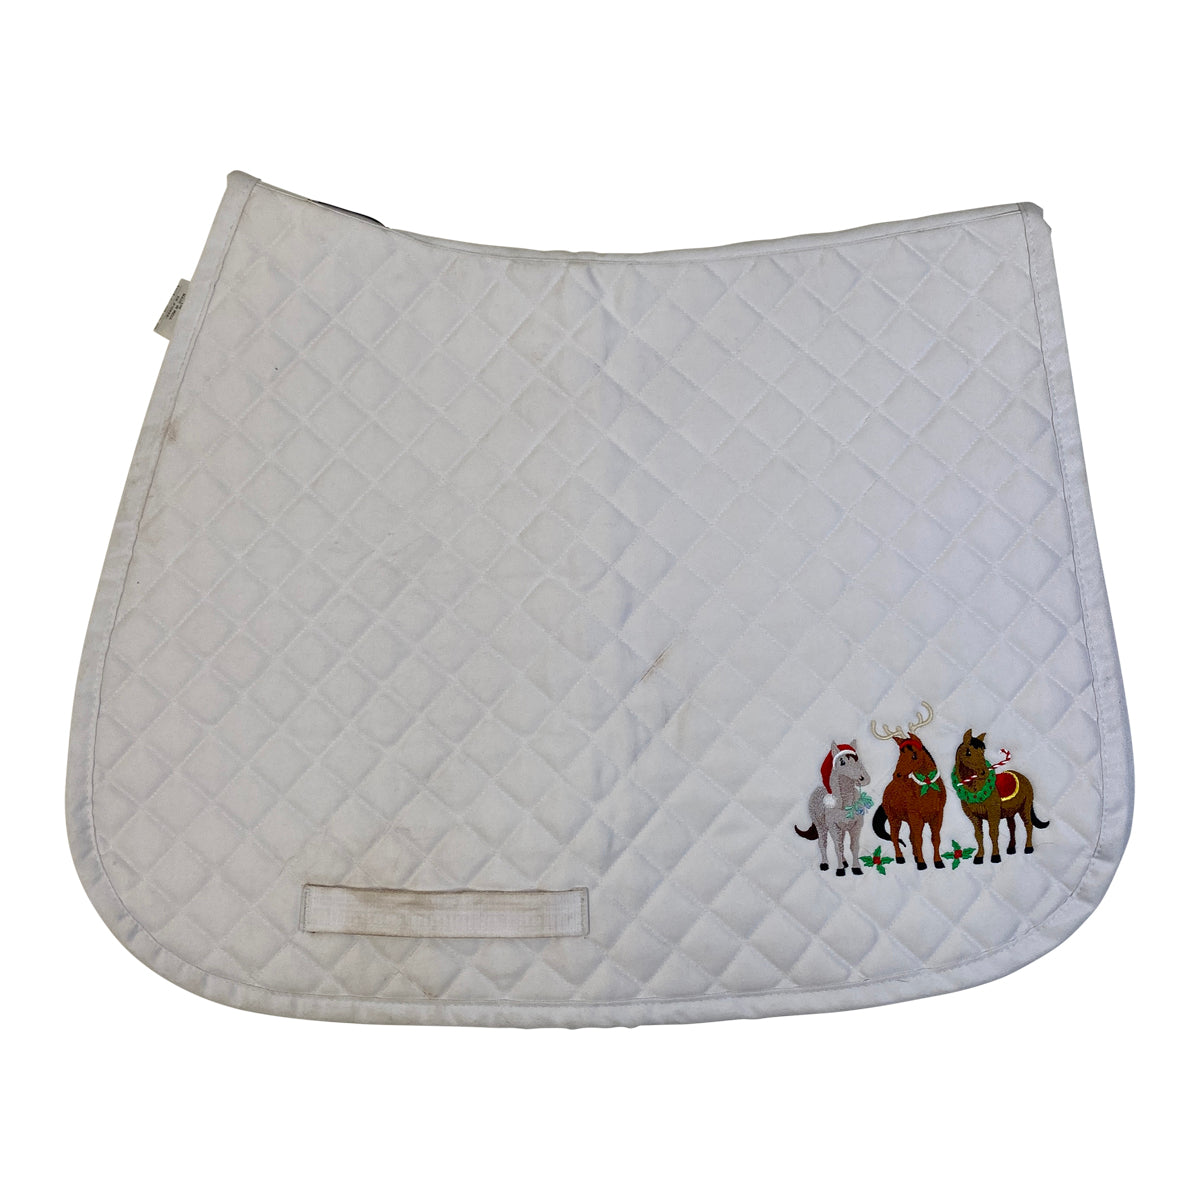 TuffRider Diamond Quilted Baby Pad in White